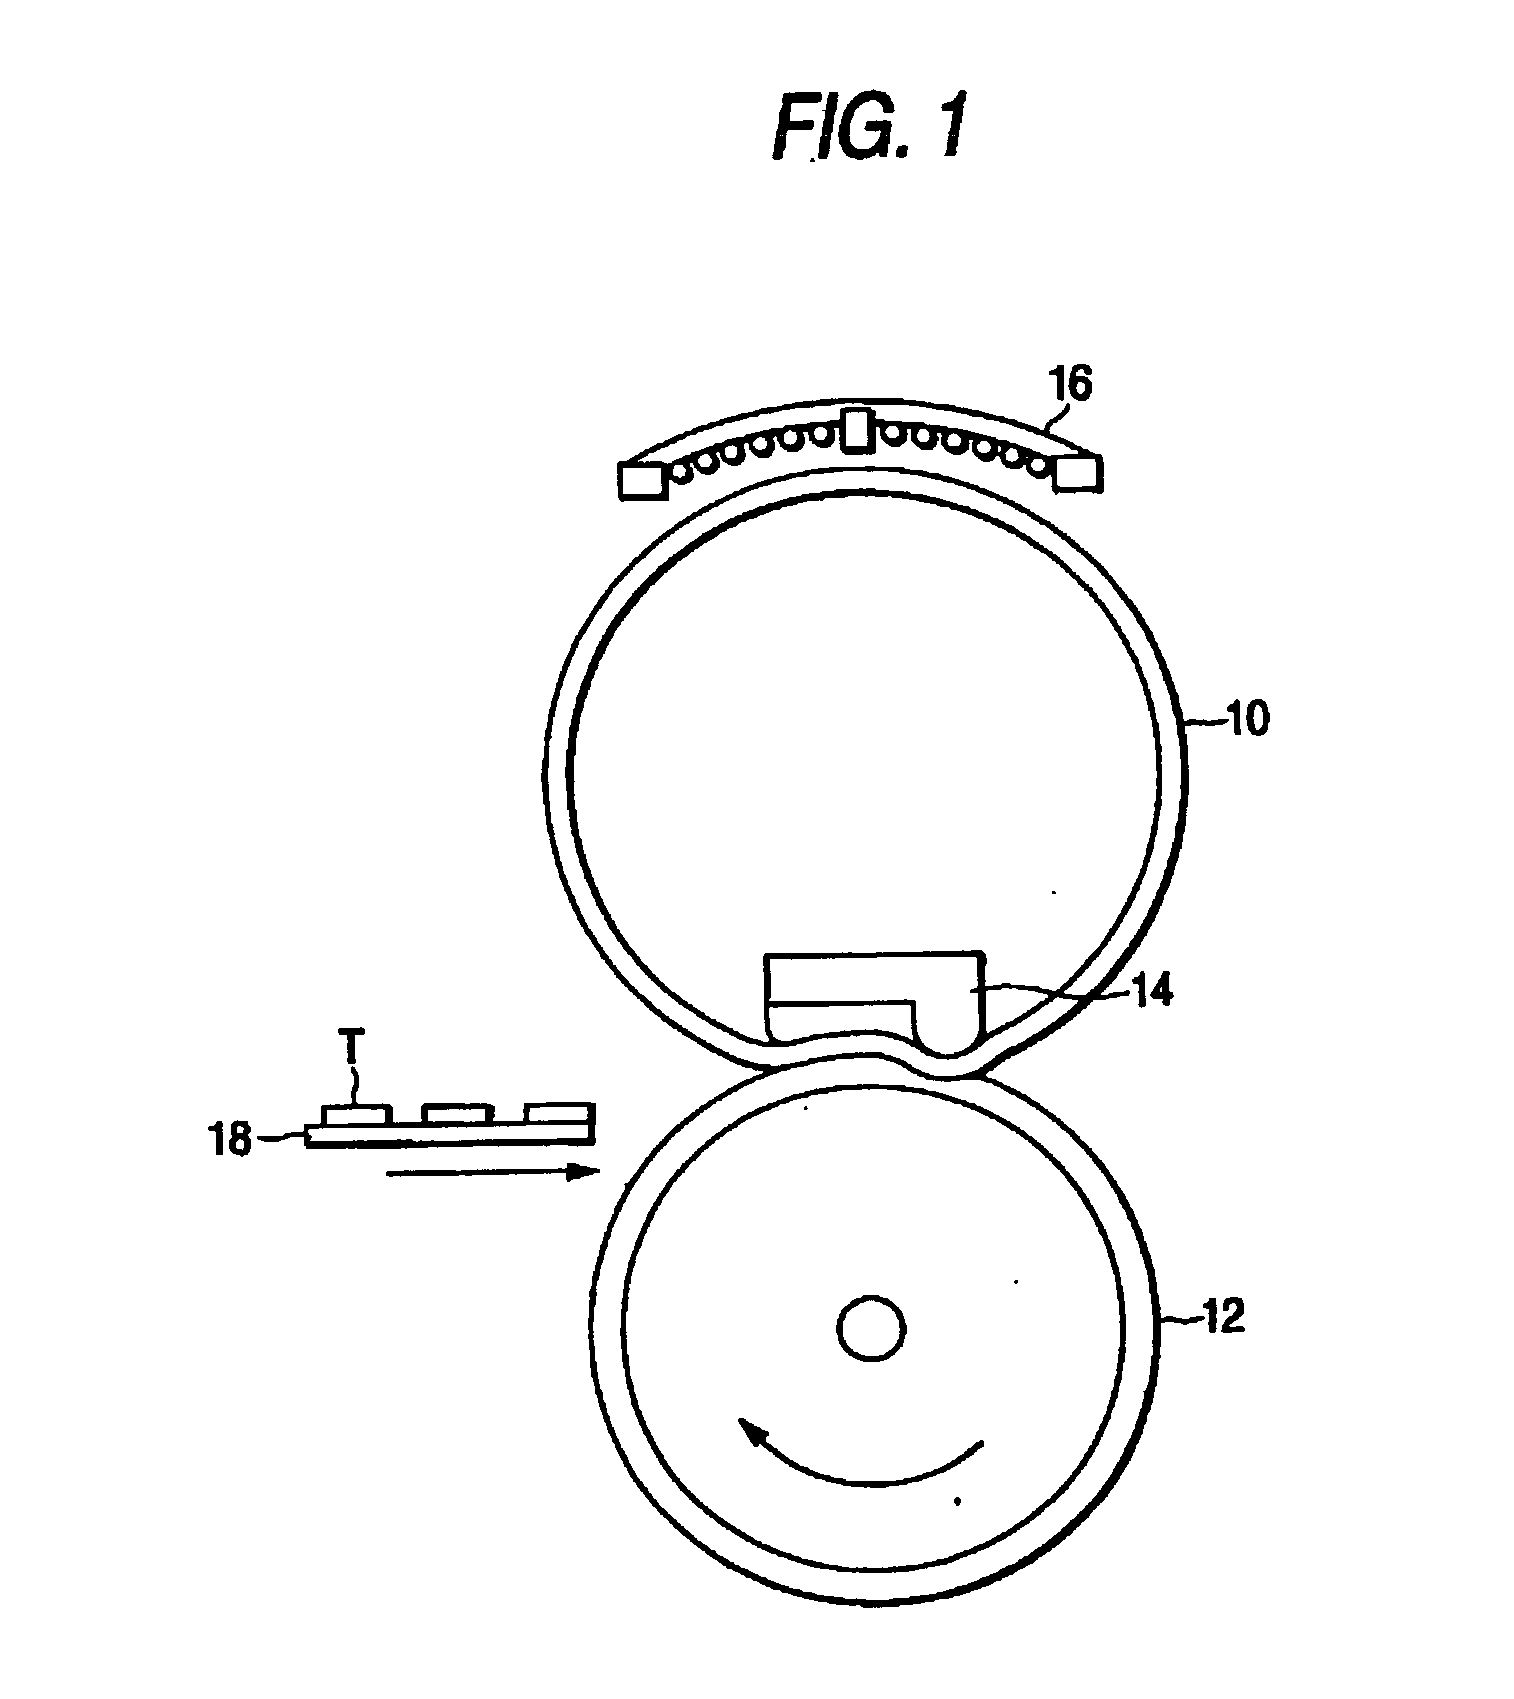 Resin composition, process for producing the same and electrophotographic fixing member